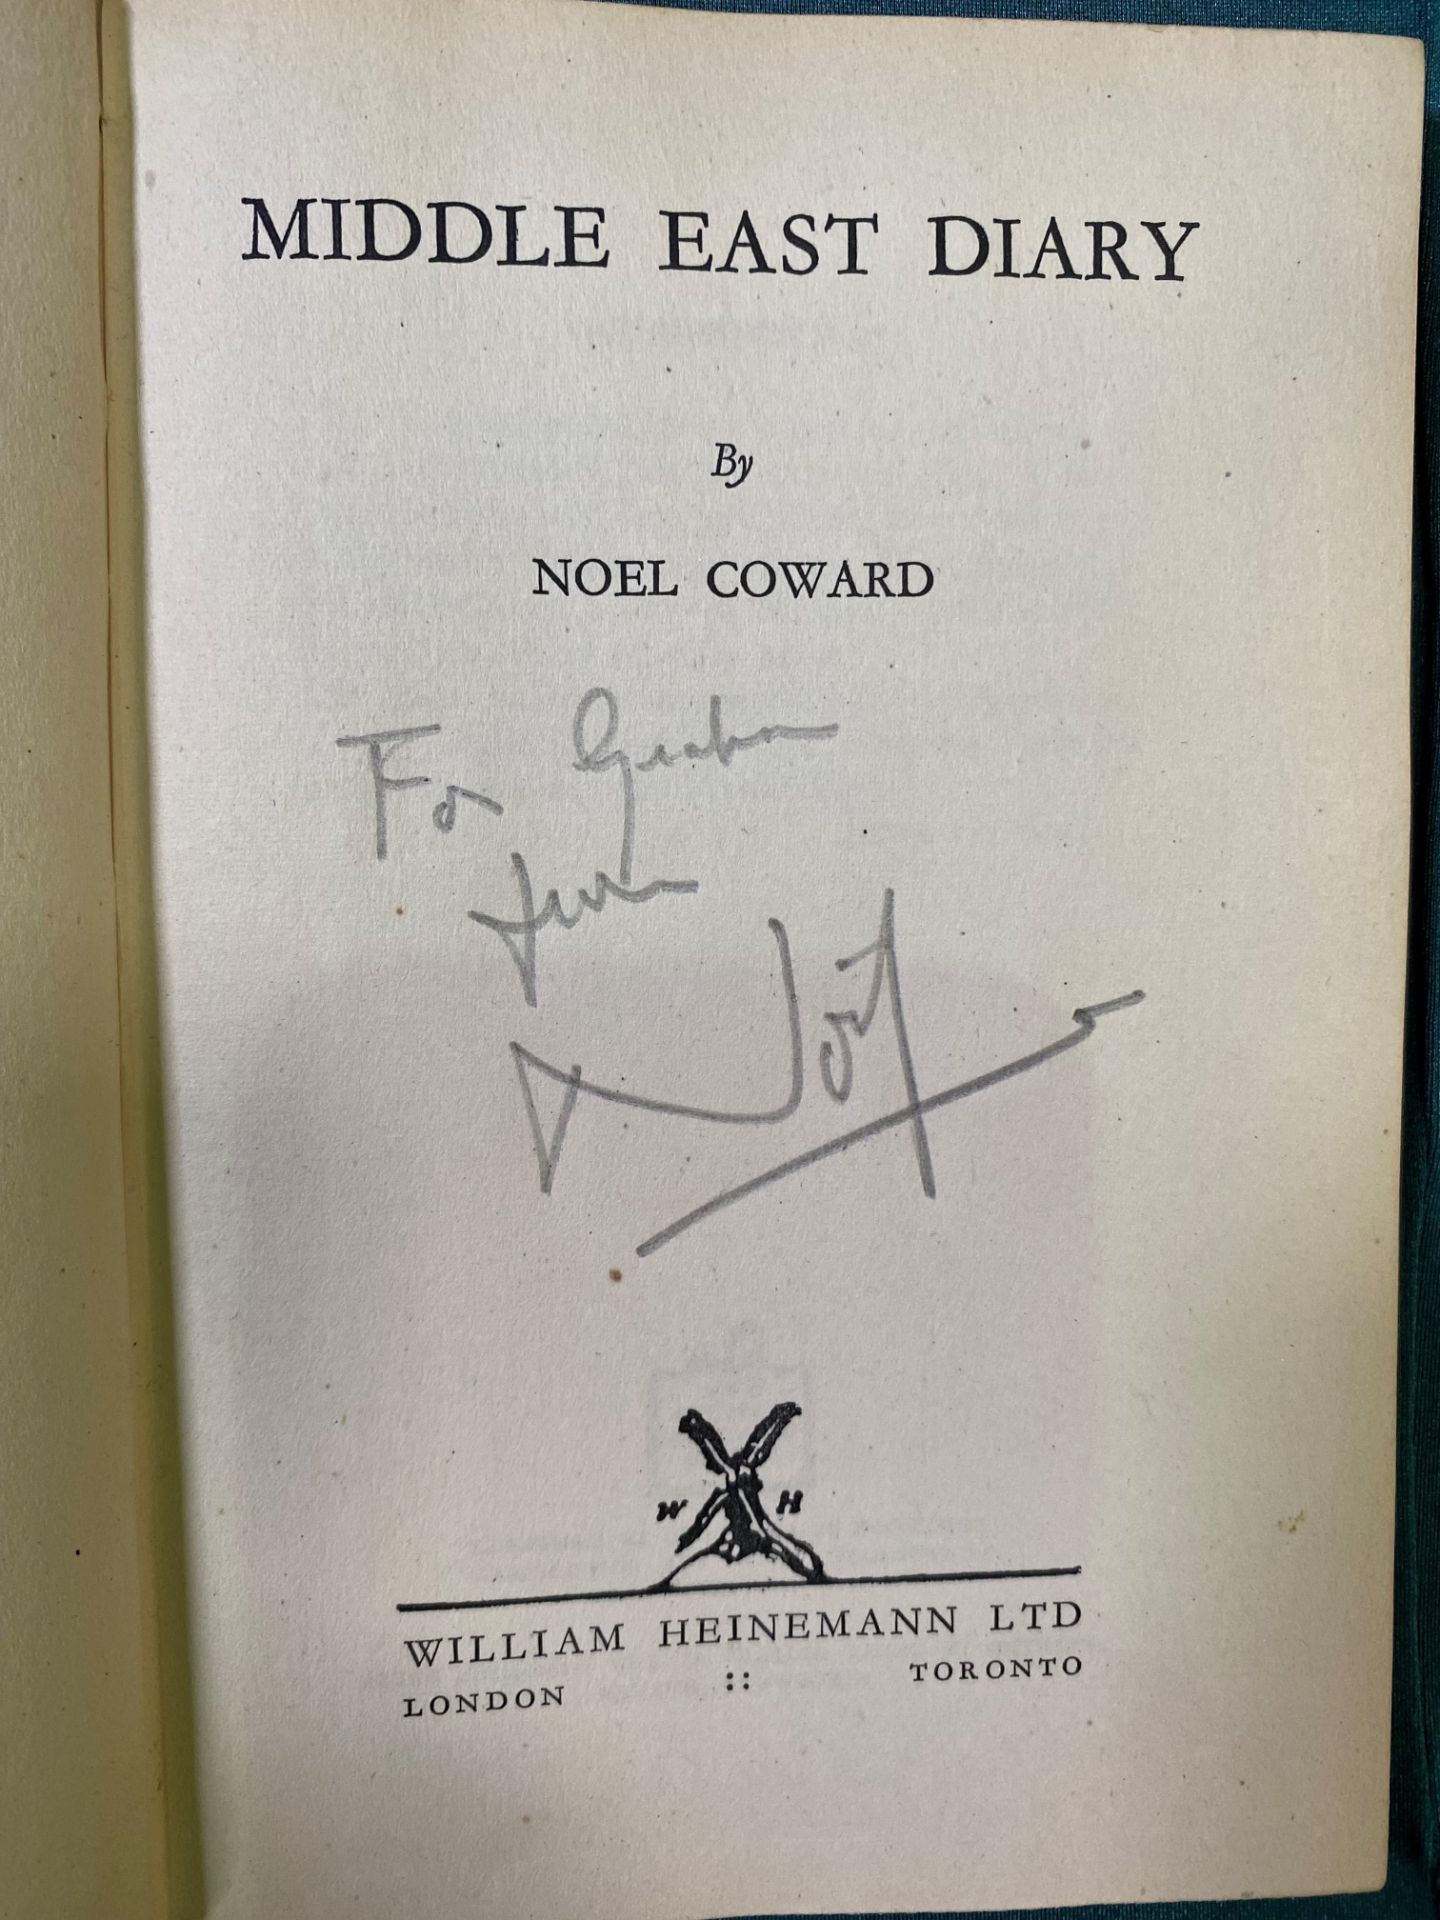 Noel Coward, Middle East Diary, first edition, William Heinemann Ltd, 1944 - Image 4 of 7